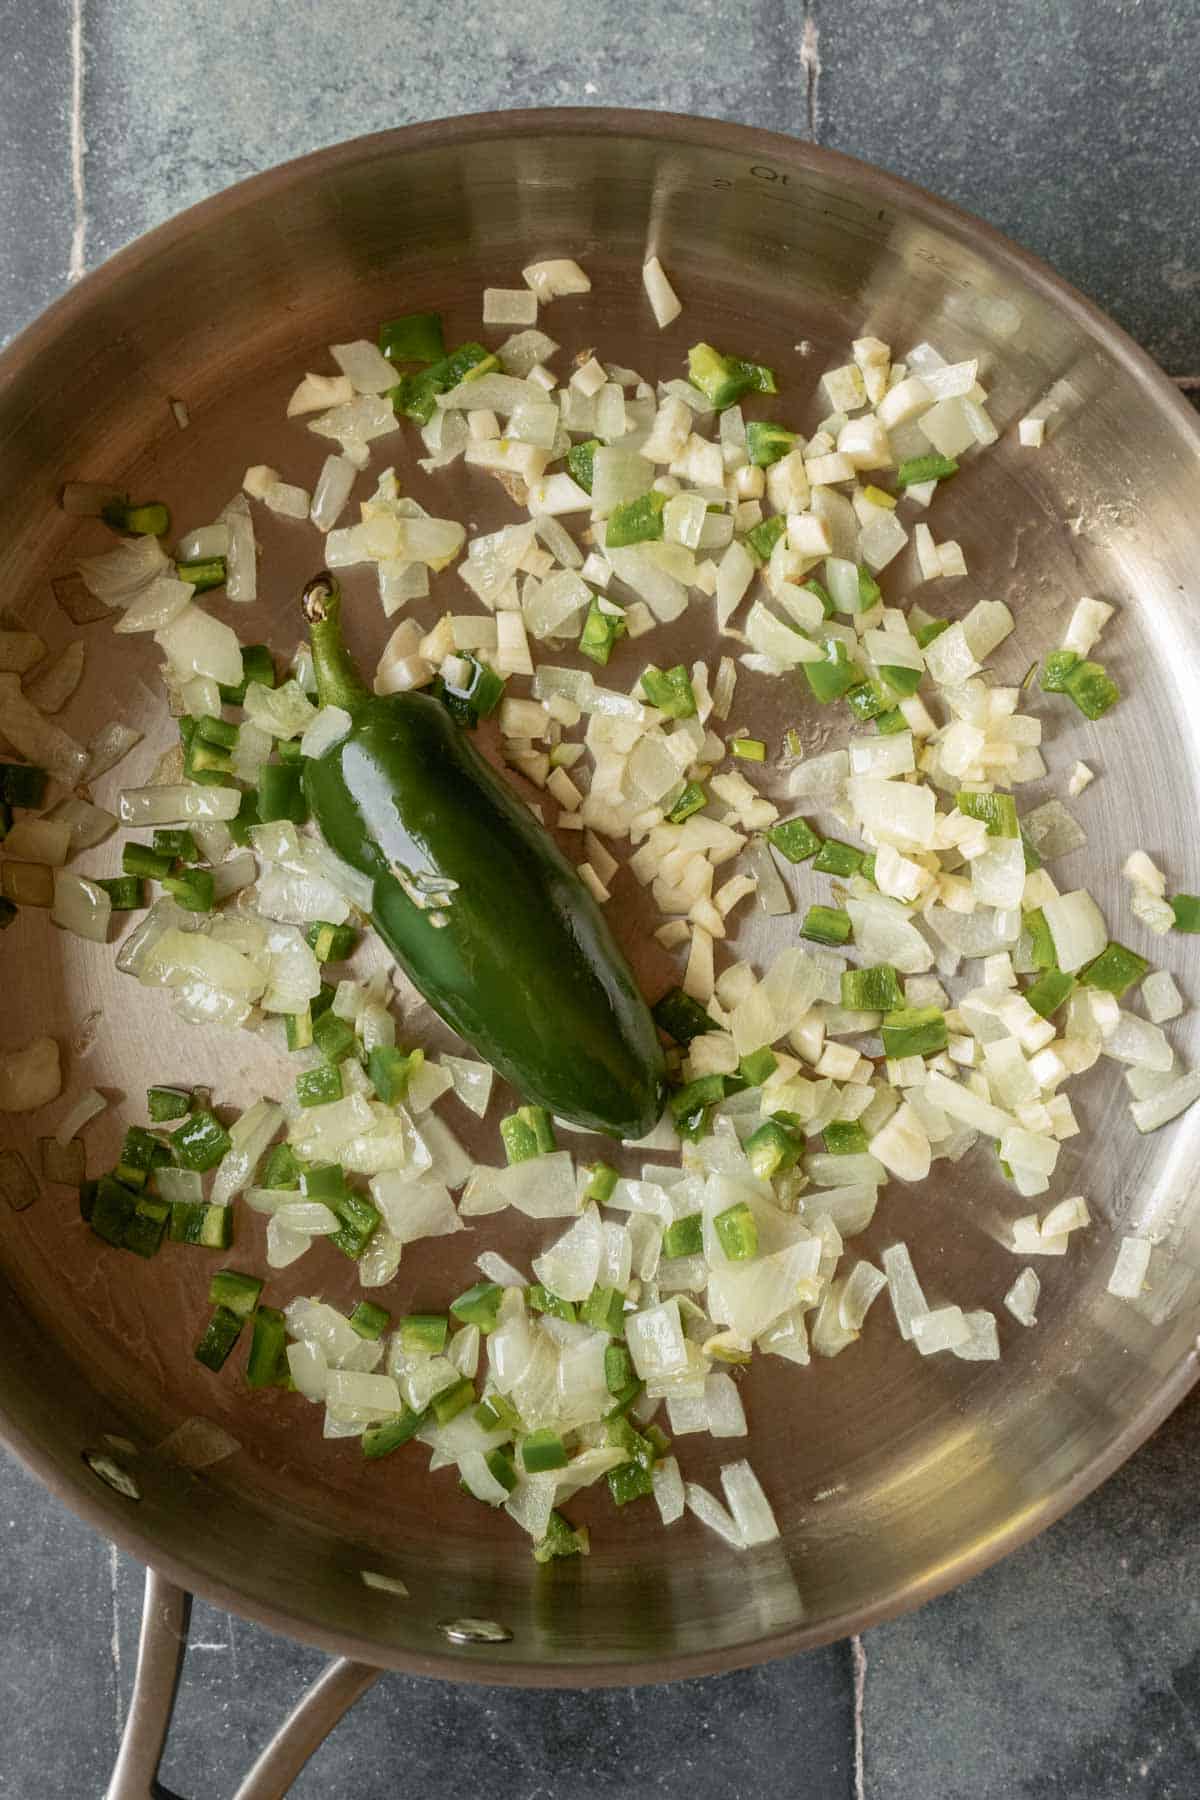 Sauteed onion and jalapeno in oil serve as the base for the beans.